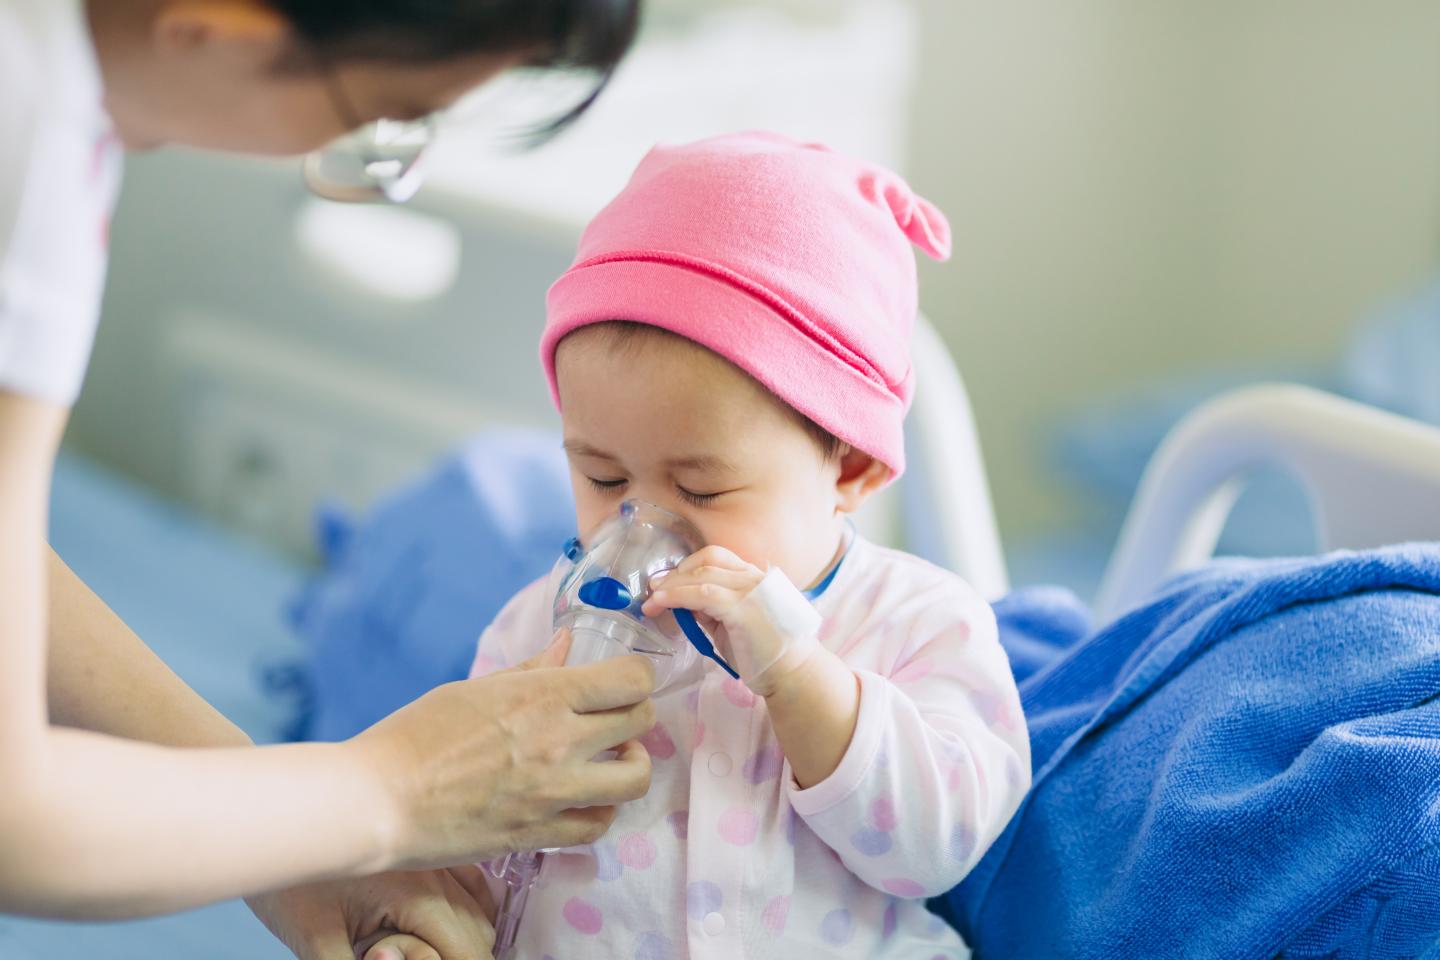 Vaccine Proves Effective against the Most Severe Type of Pneumonia